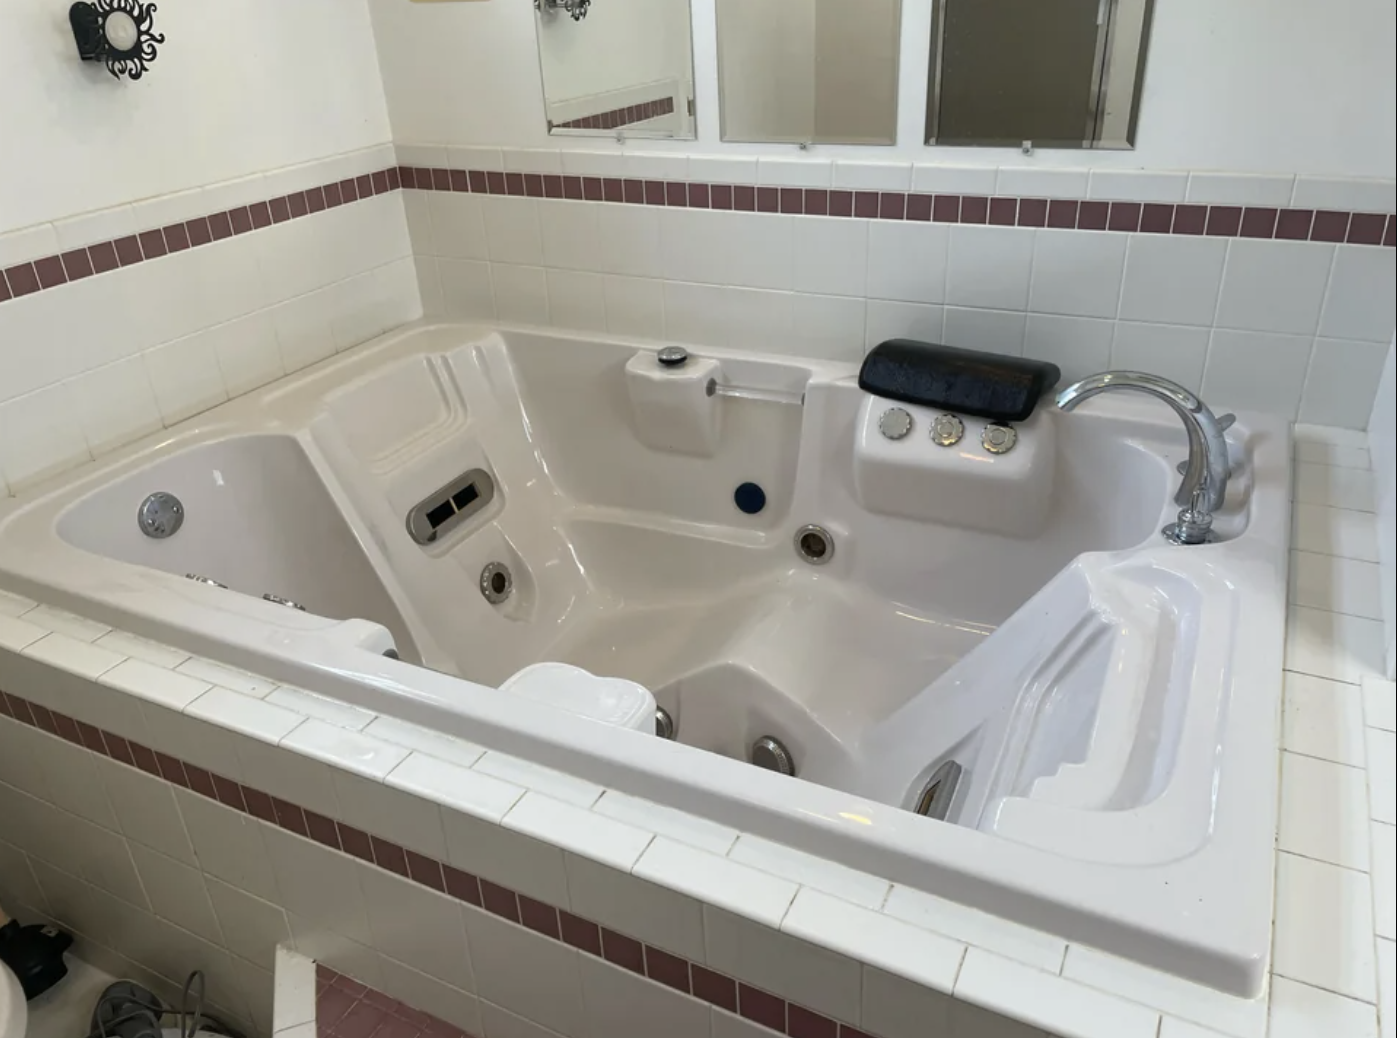 Person seeking advice on cleaning an oversized, dirty jacuzzi bathtub